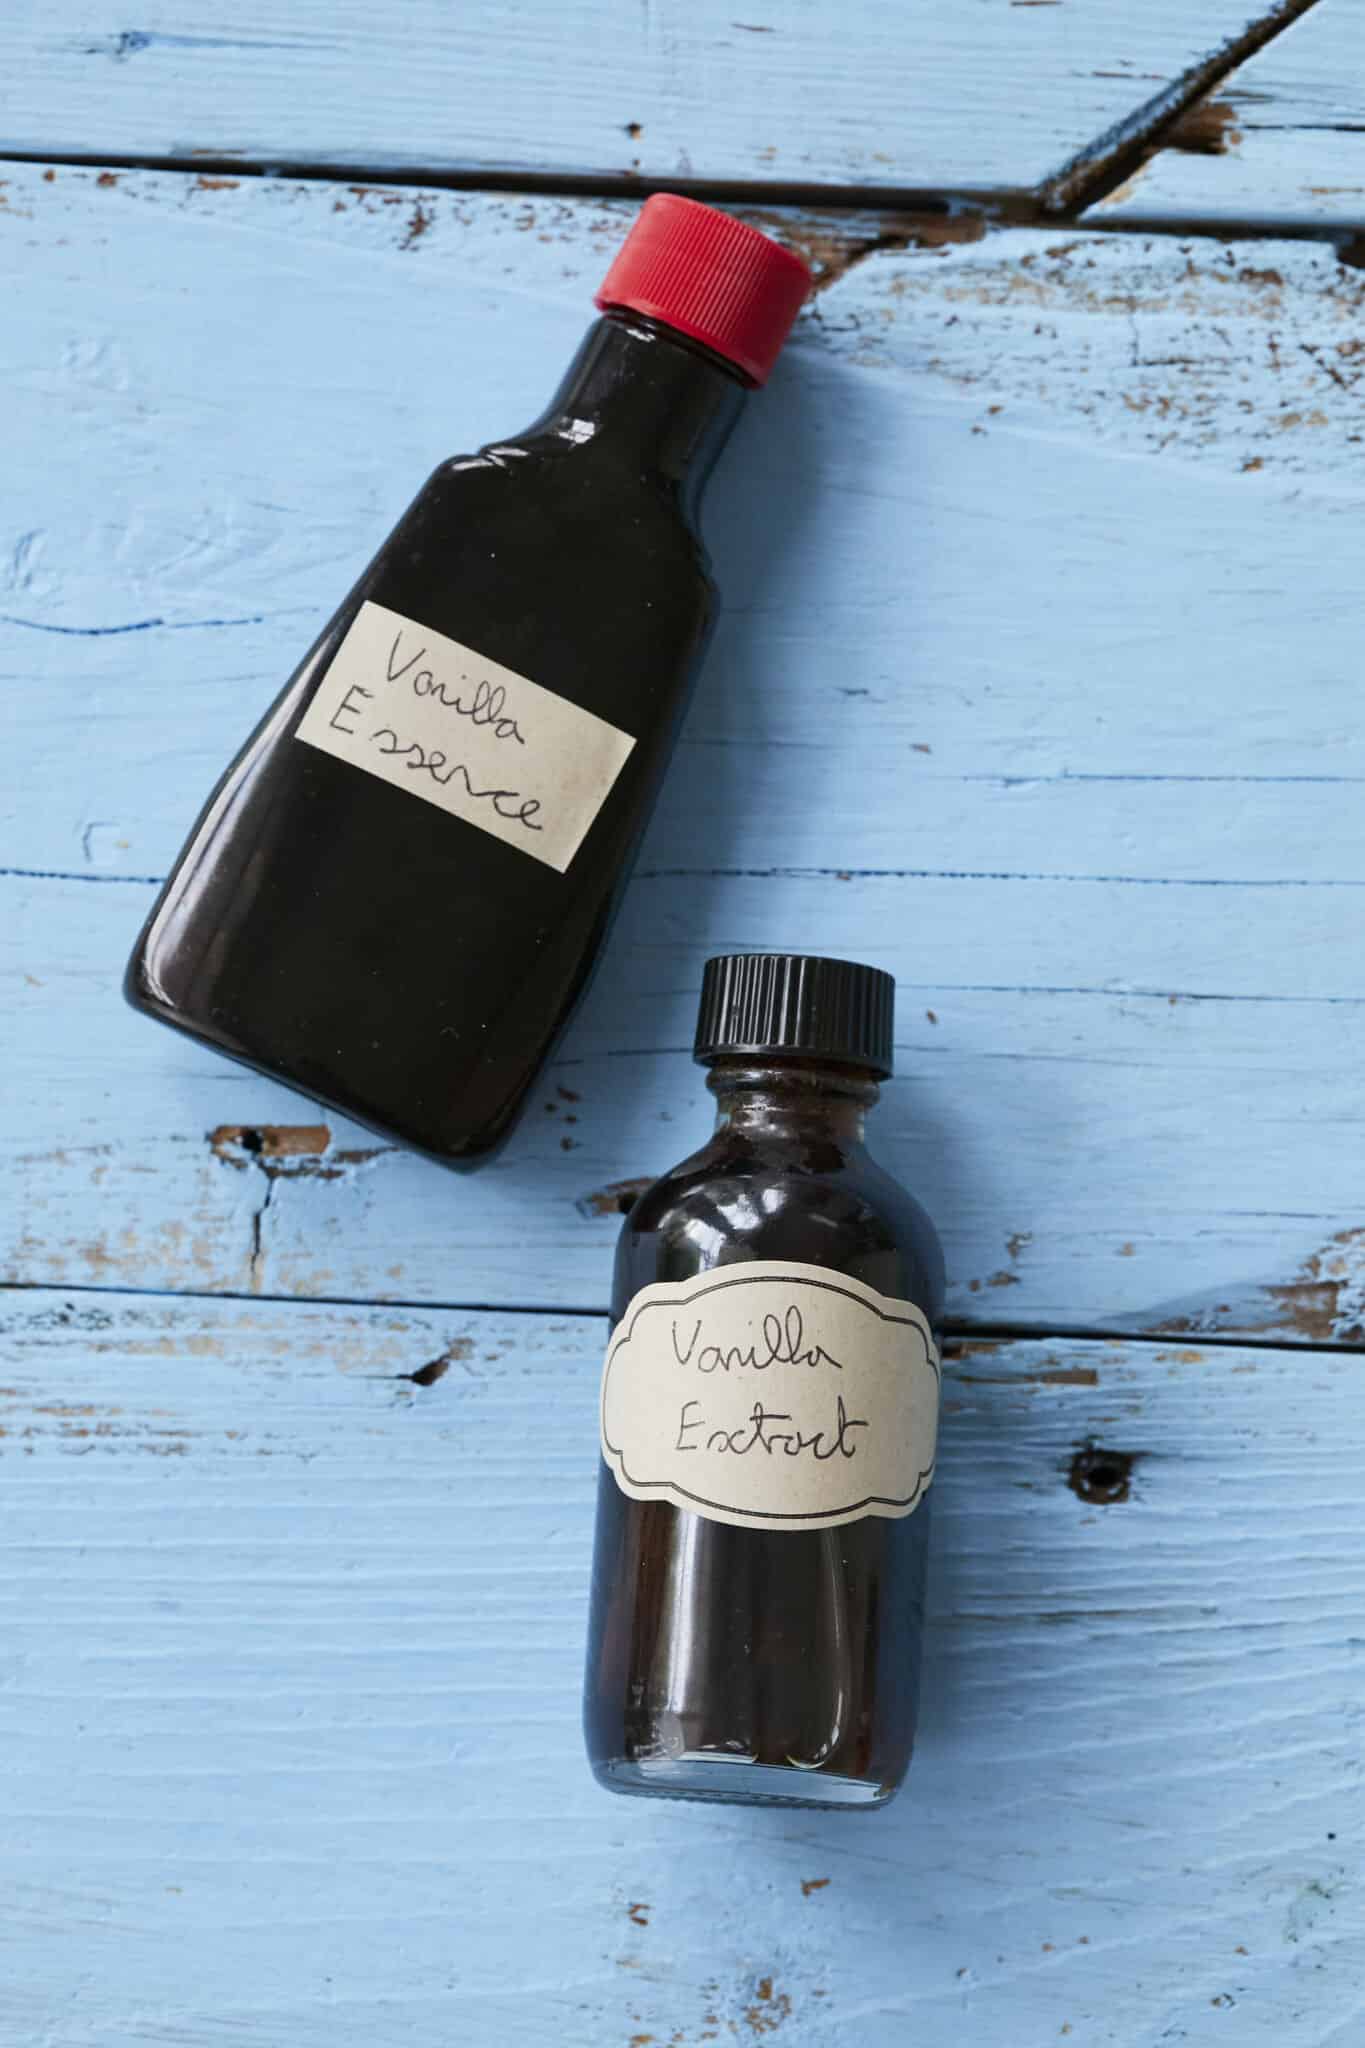 A bottle of Vanilla Essence with a red cap is next to a bottle of Vanilla Extract with a black cap for comparison. 